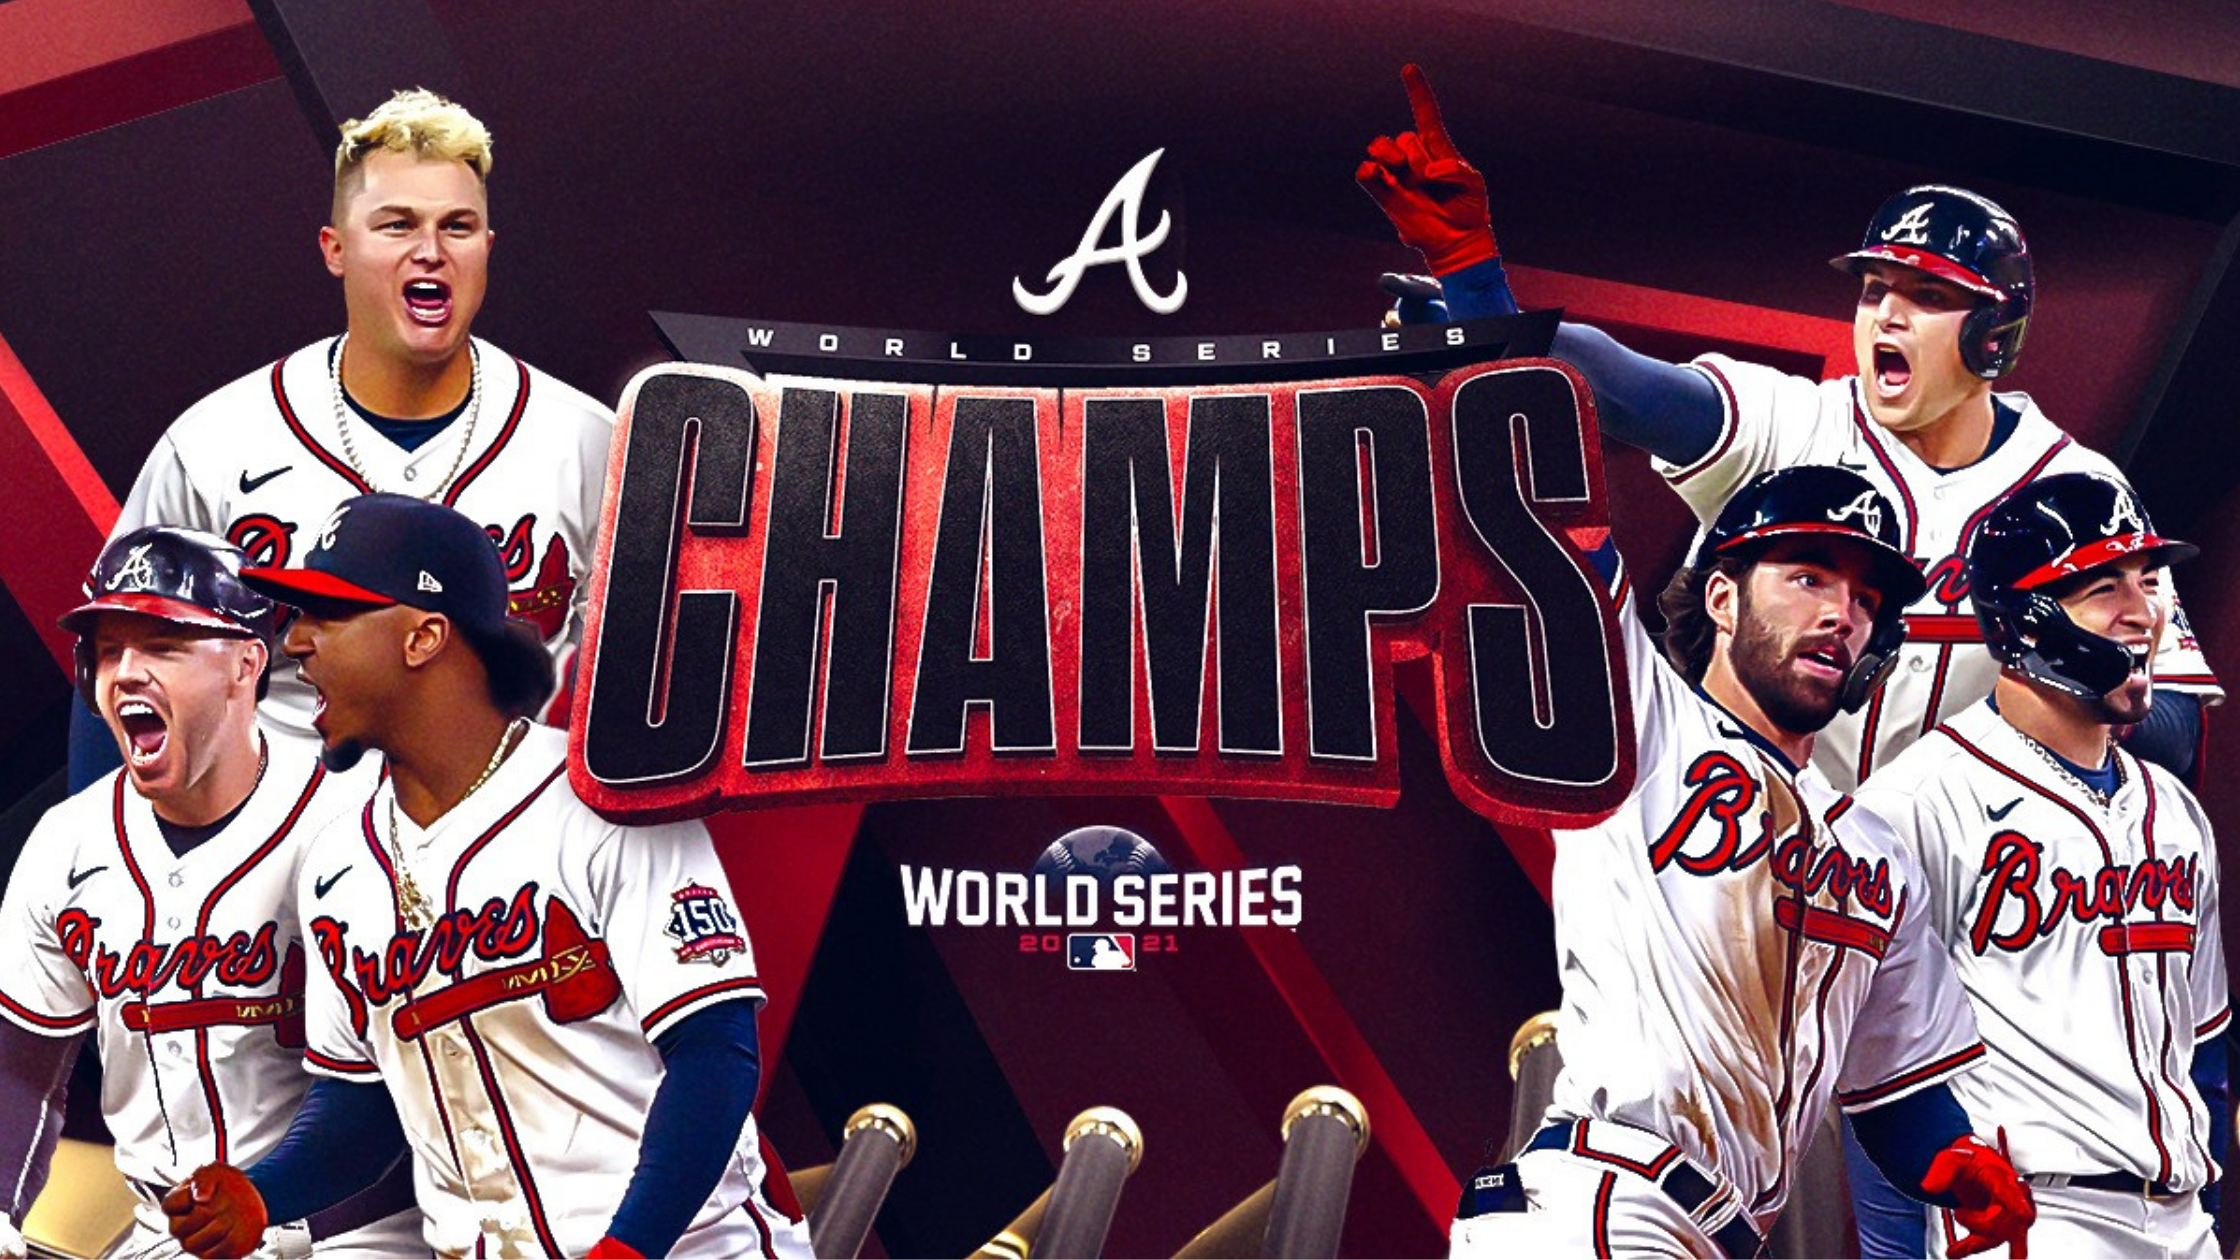 Atlanta Braves Archives - The Cordcutter - The Official Mohu Blog